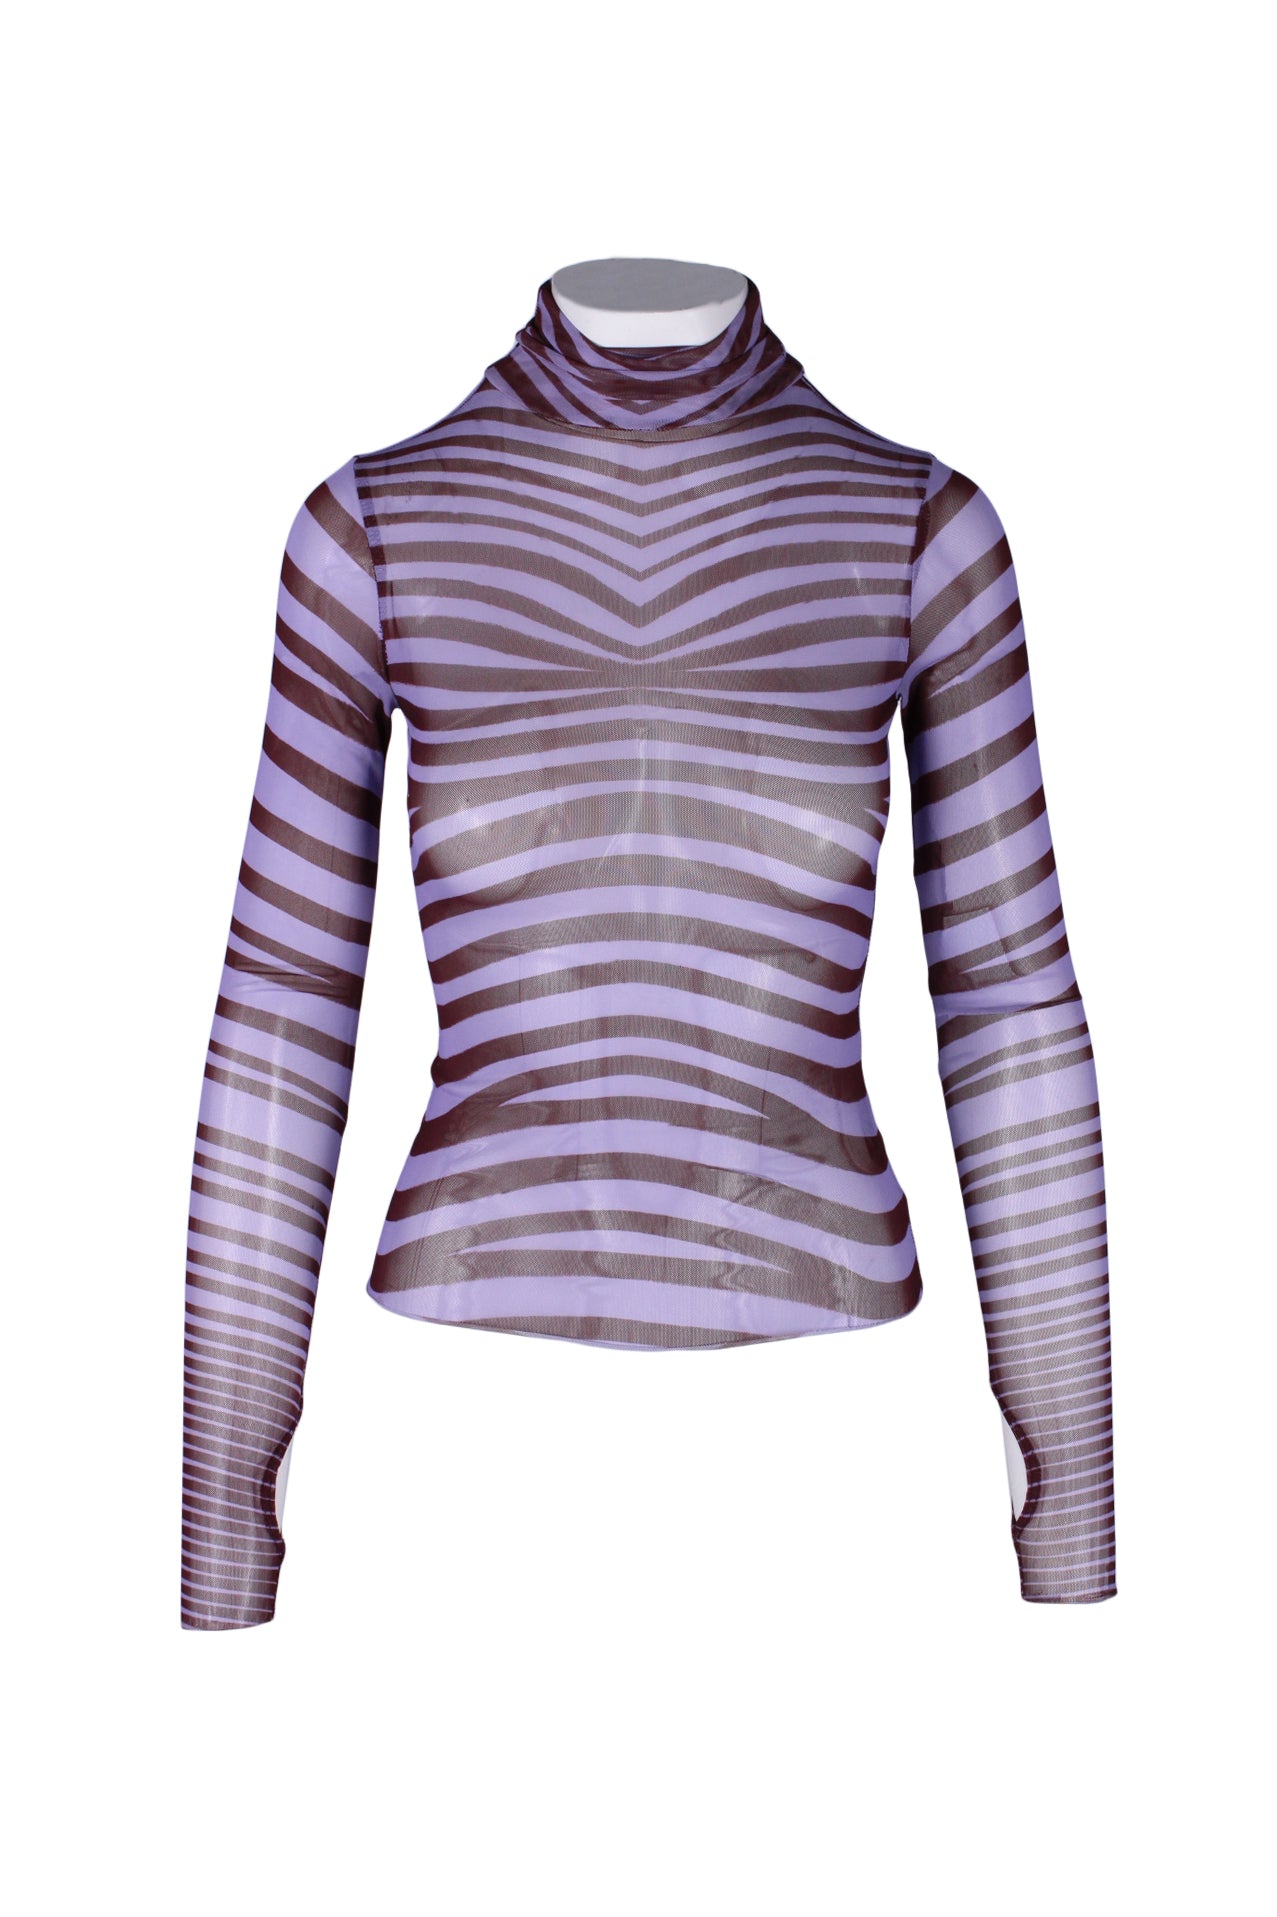 description: afrm purple and maroon swirl print long sleeve mesh top. features turtle neck, fitted style, mesh fabric throughout and thumbholes. 